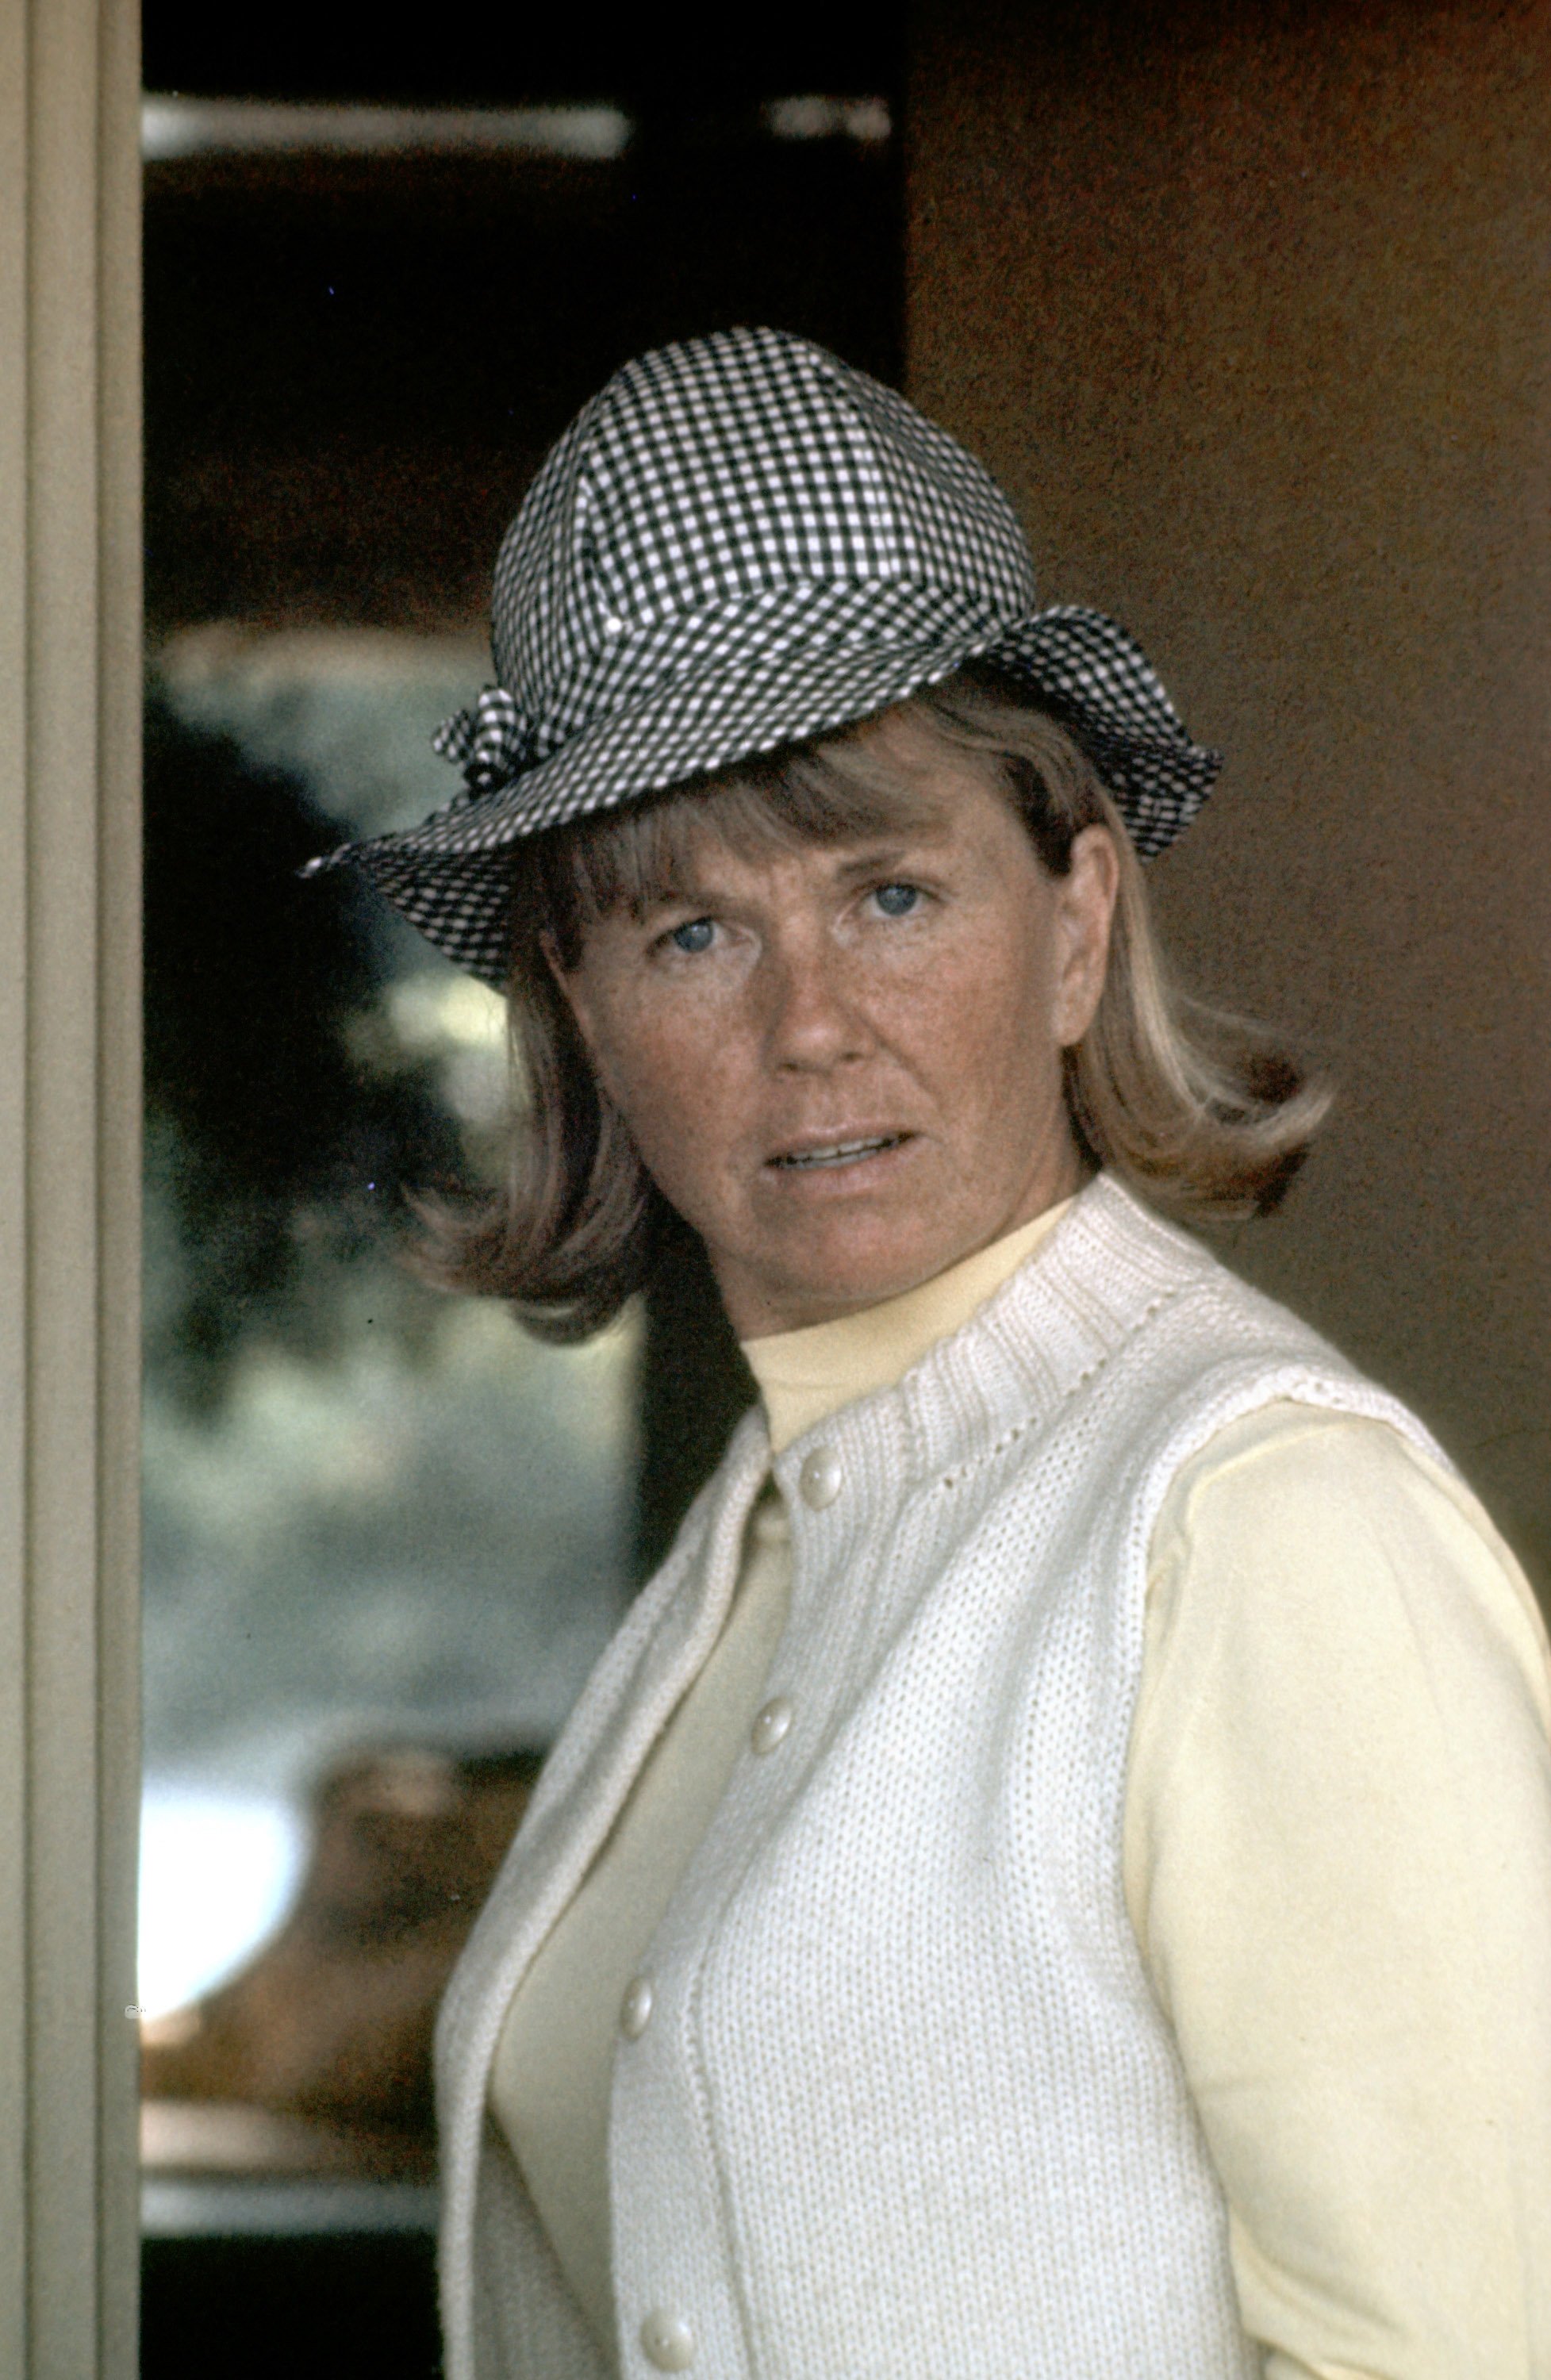 Doris Day pictured showing a serious facial expression, wearing an off-white cardigan paired with a yellow sweater and a black and white hat. / Source: Getty Images